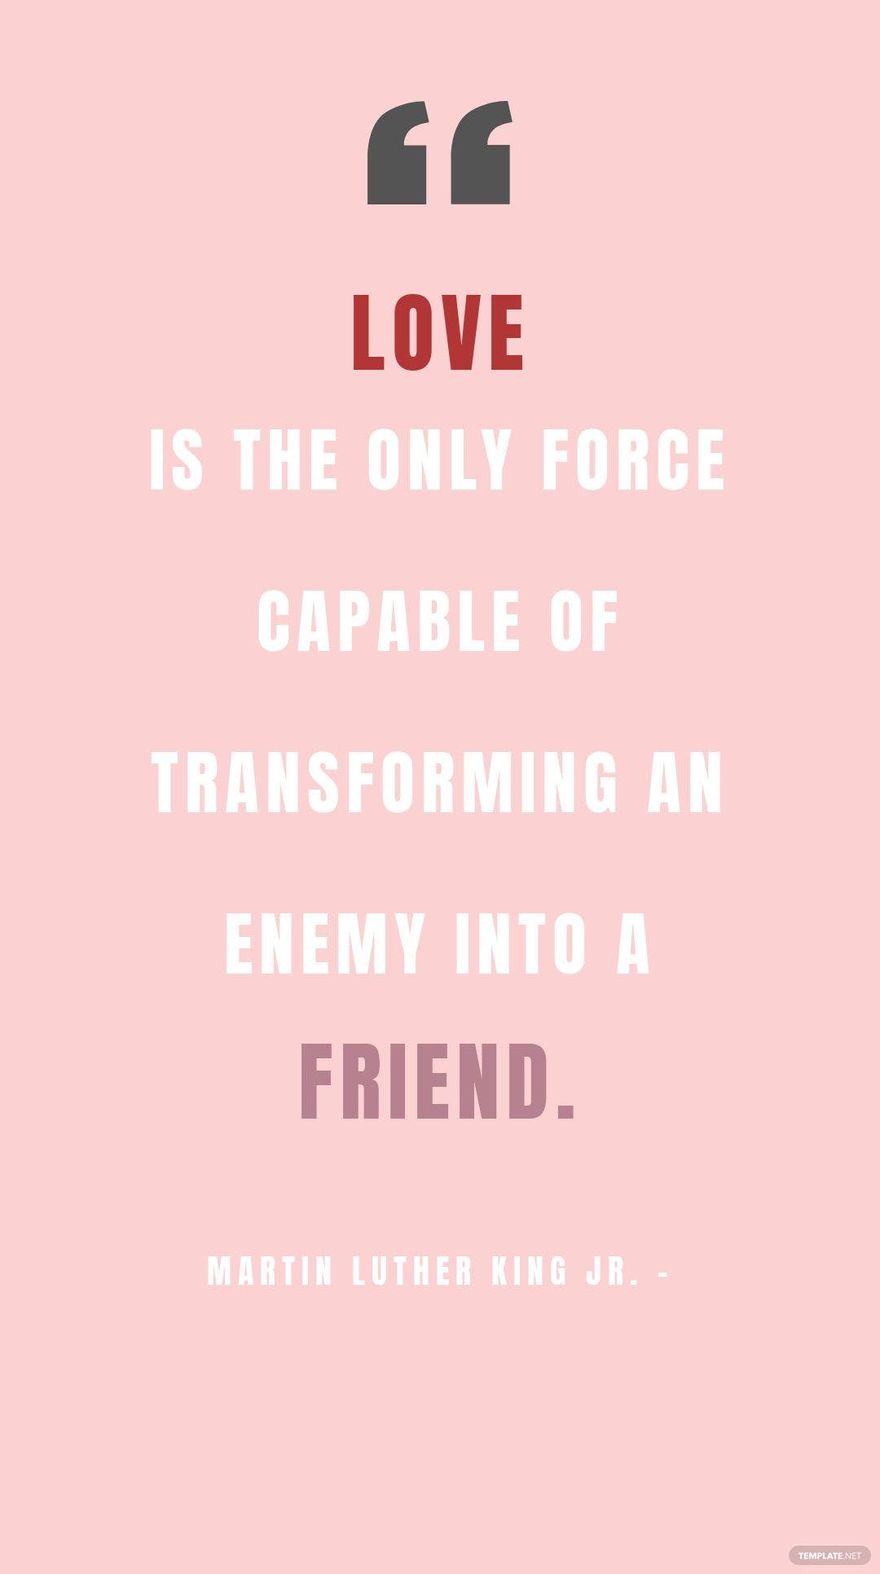 Martin Luther King Jr. - Love is the only force capable of transforming an enemy into a friend. in JPG